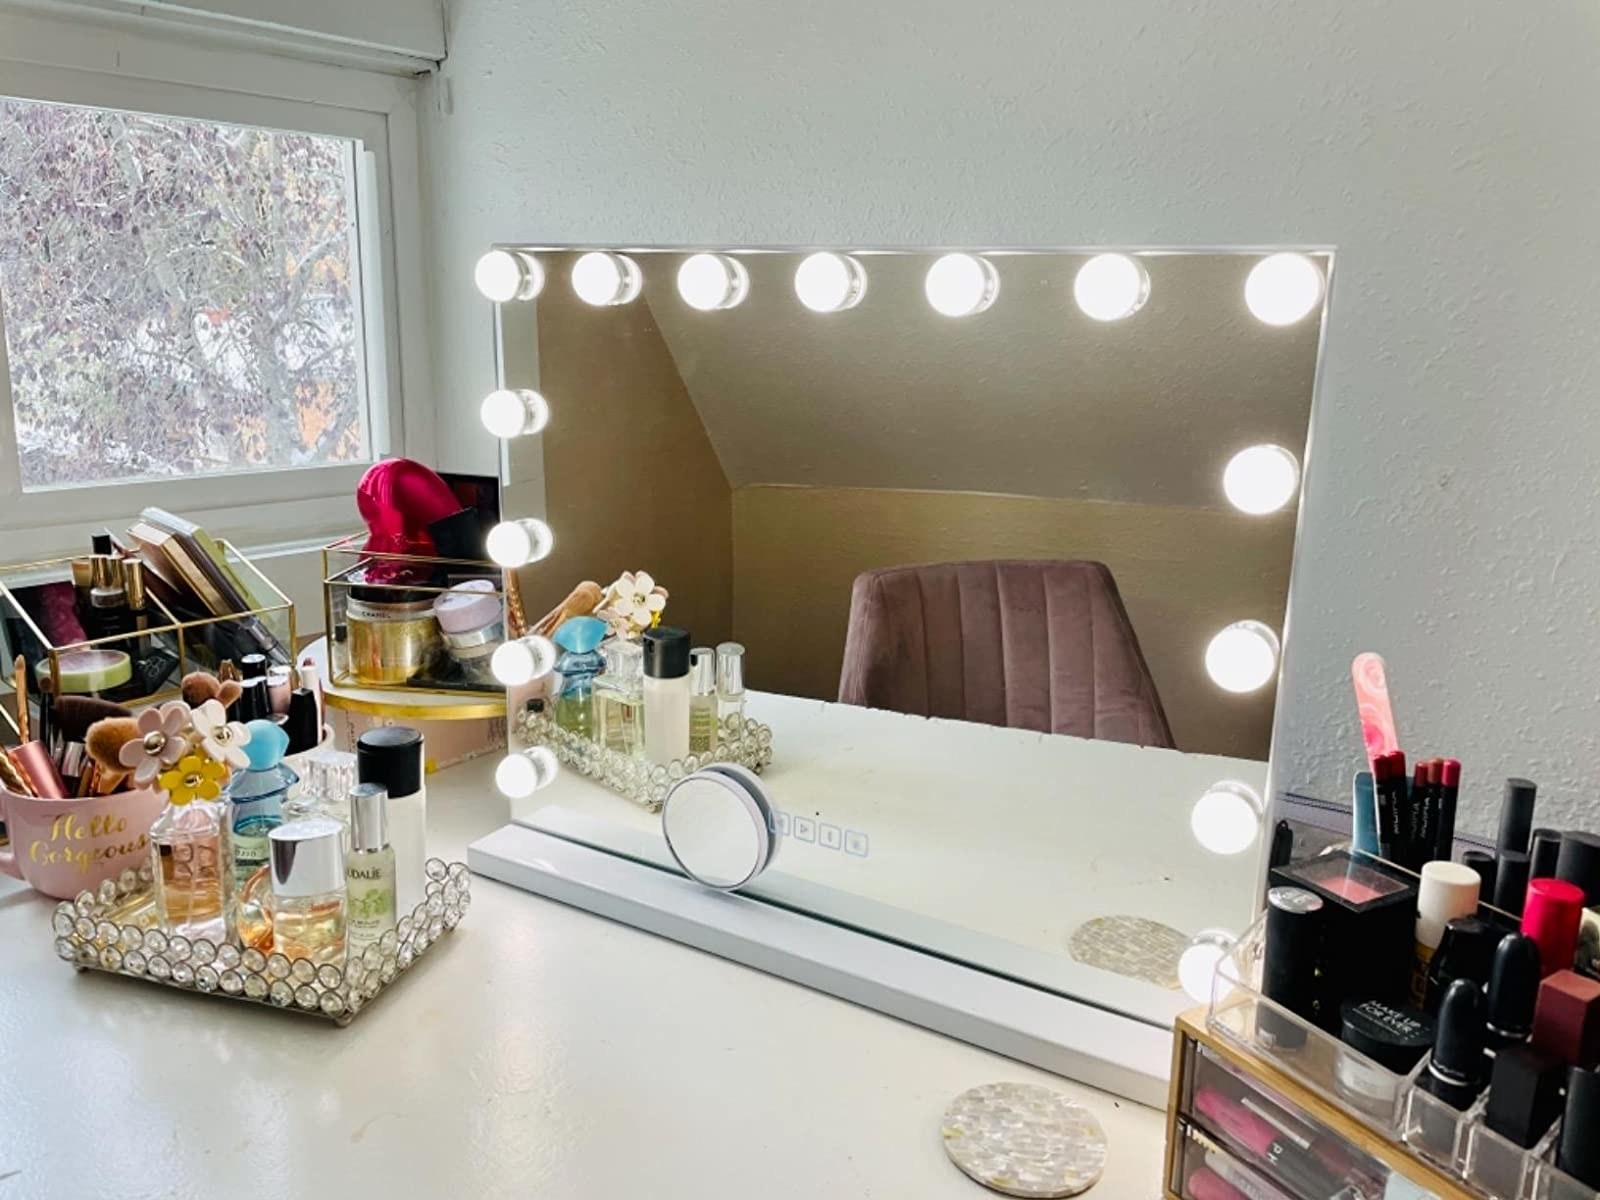 reviewer image of their vanity with the mirror